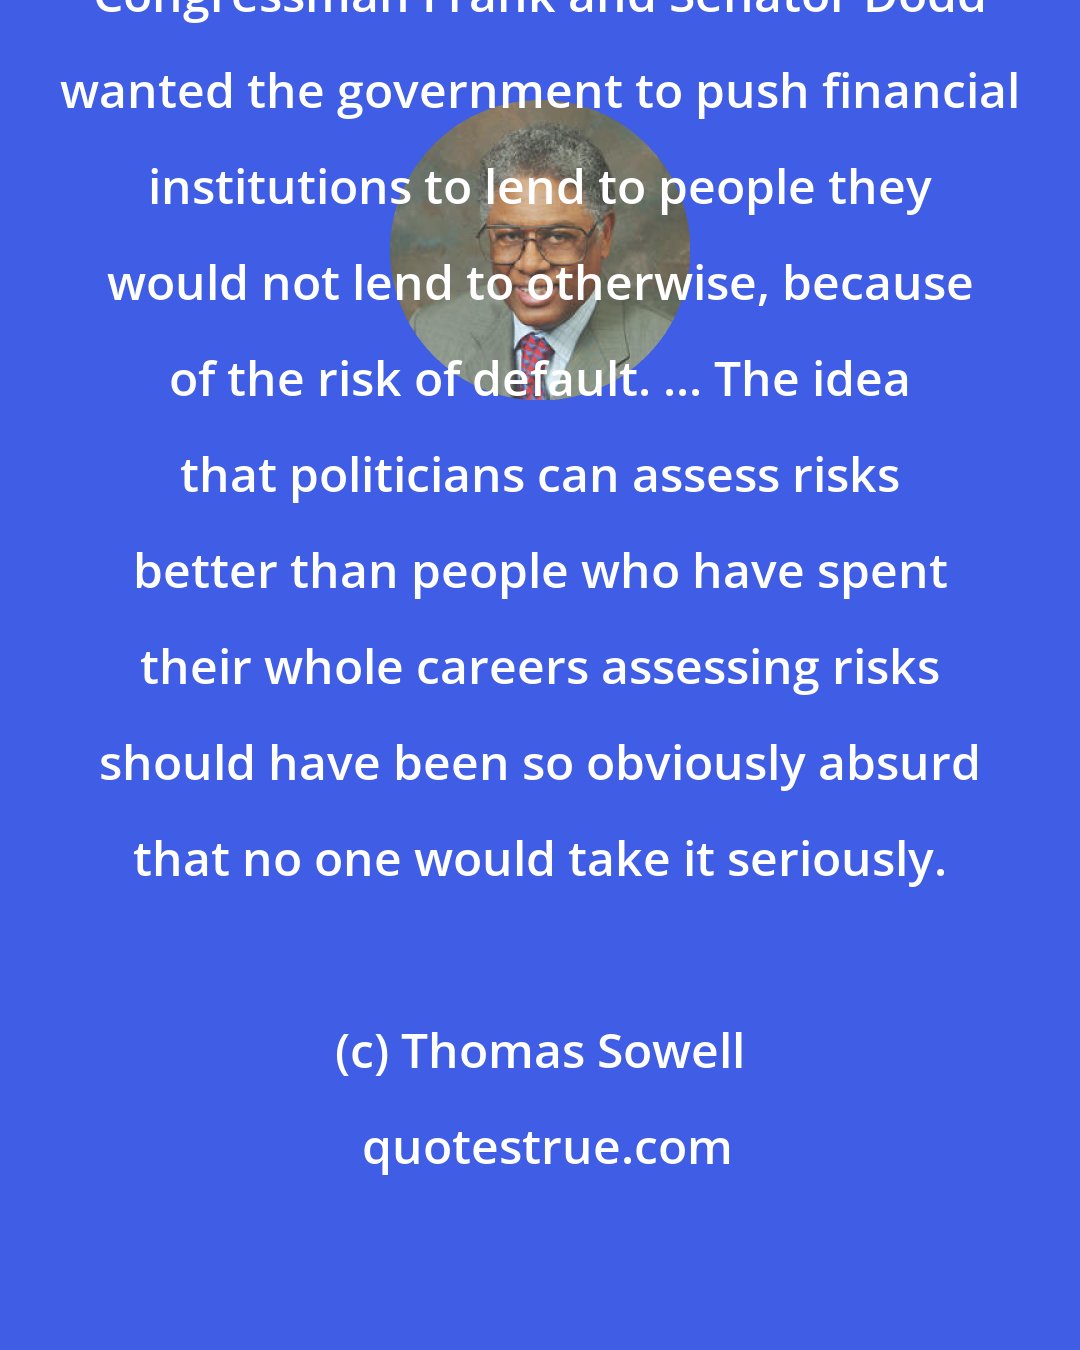 Thomas Sowell: Congressman Frank and Senator Dodd wanted the government to push financial institutions to lend to people they would not lend to otherwise, because of the risk of default. ... The idea that politicians can assess risks better than people who have spent their whole careers assessing risks should have been so obviously absurd that no one would take it seriously.